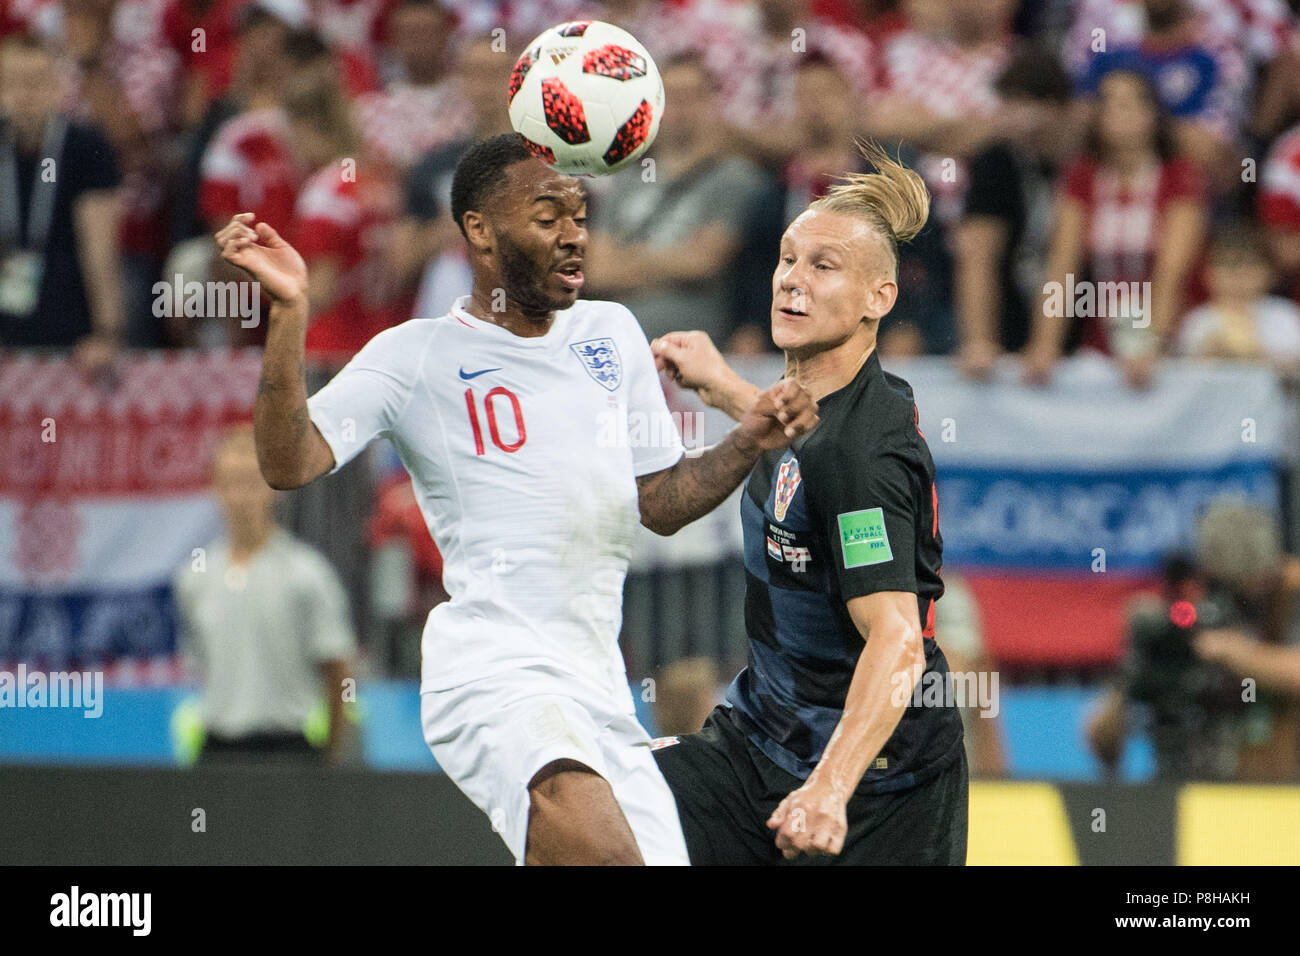 Raheem STERLING (left, ENG) versus Domagoj VIDA (CRO), action, duels, Croatia (CRO) - England (ENG) 2: 1, semi-finals, match 62, on 11.07.2018 in Moscow; Football World Cup 2018 in Russia from 14.06. - 15.07.2018. | Usage worldwide Stock Photo